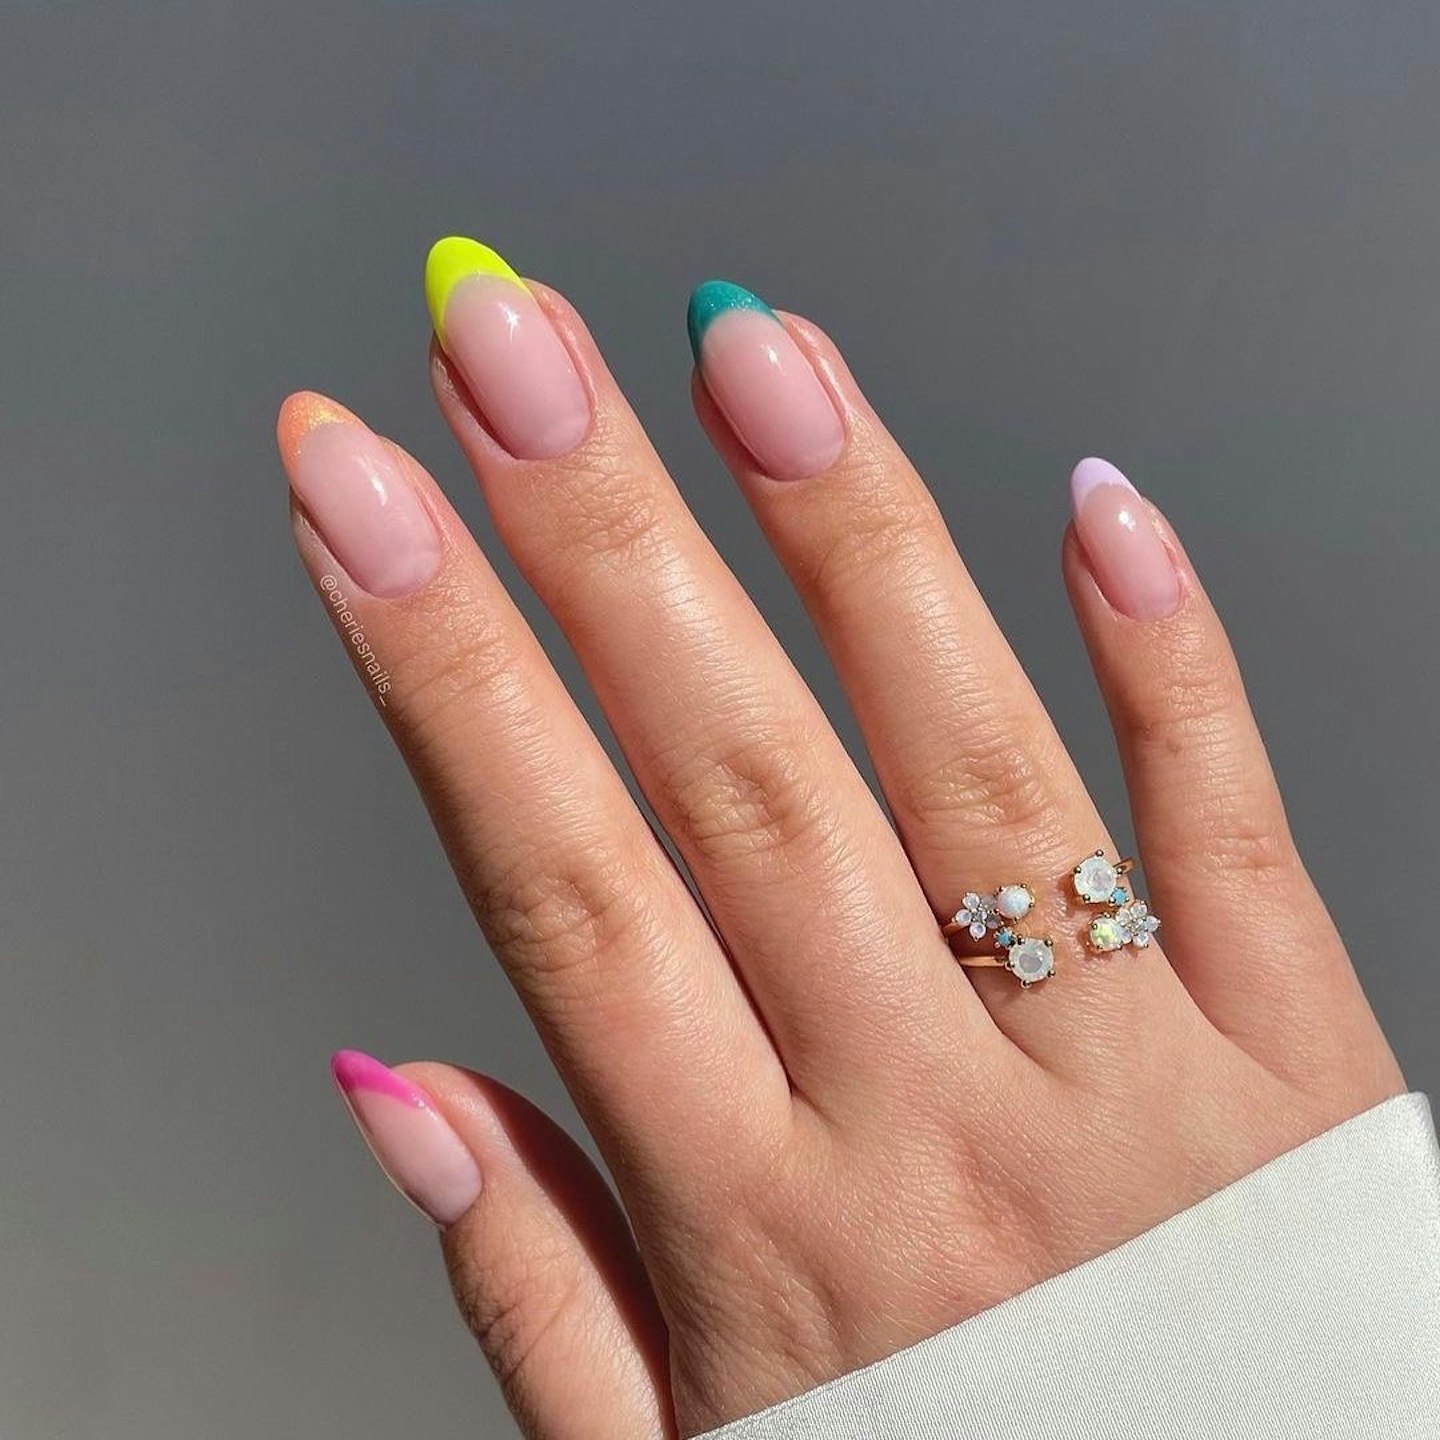 Neon French Tip Nails